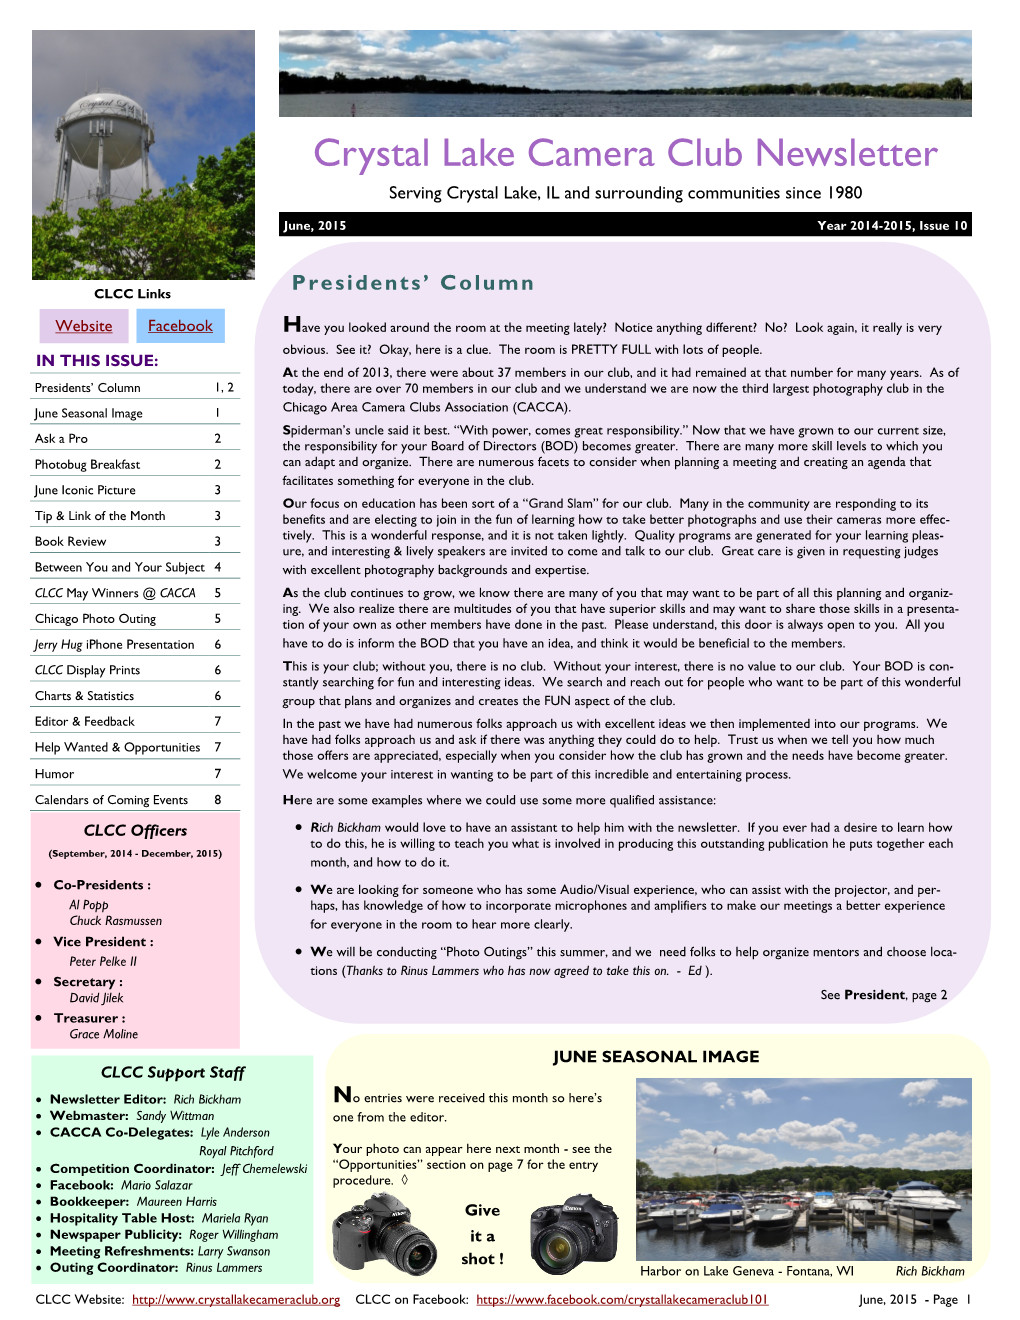 Crystal Lake Camera Club Newsletter Serving Crystal Lake, IL and Surrounding Communities Since 1980